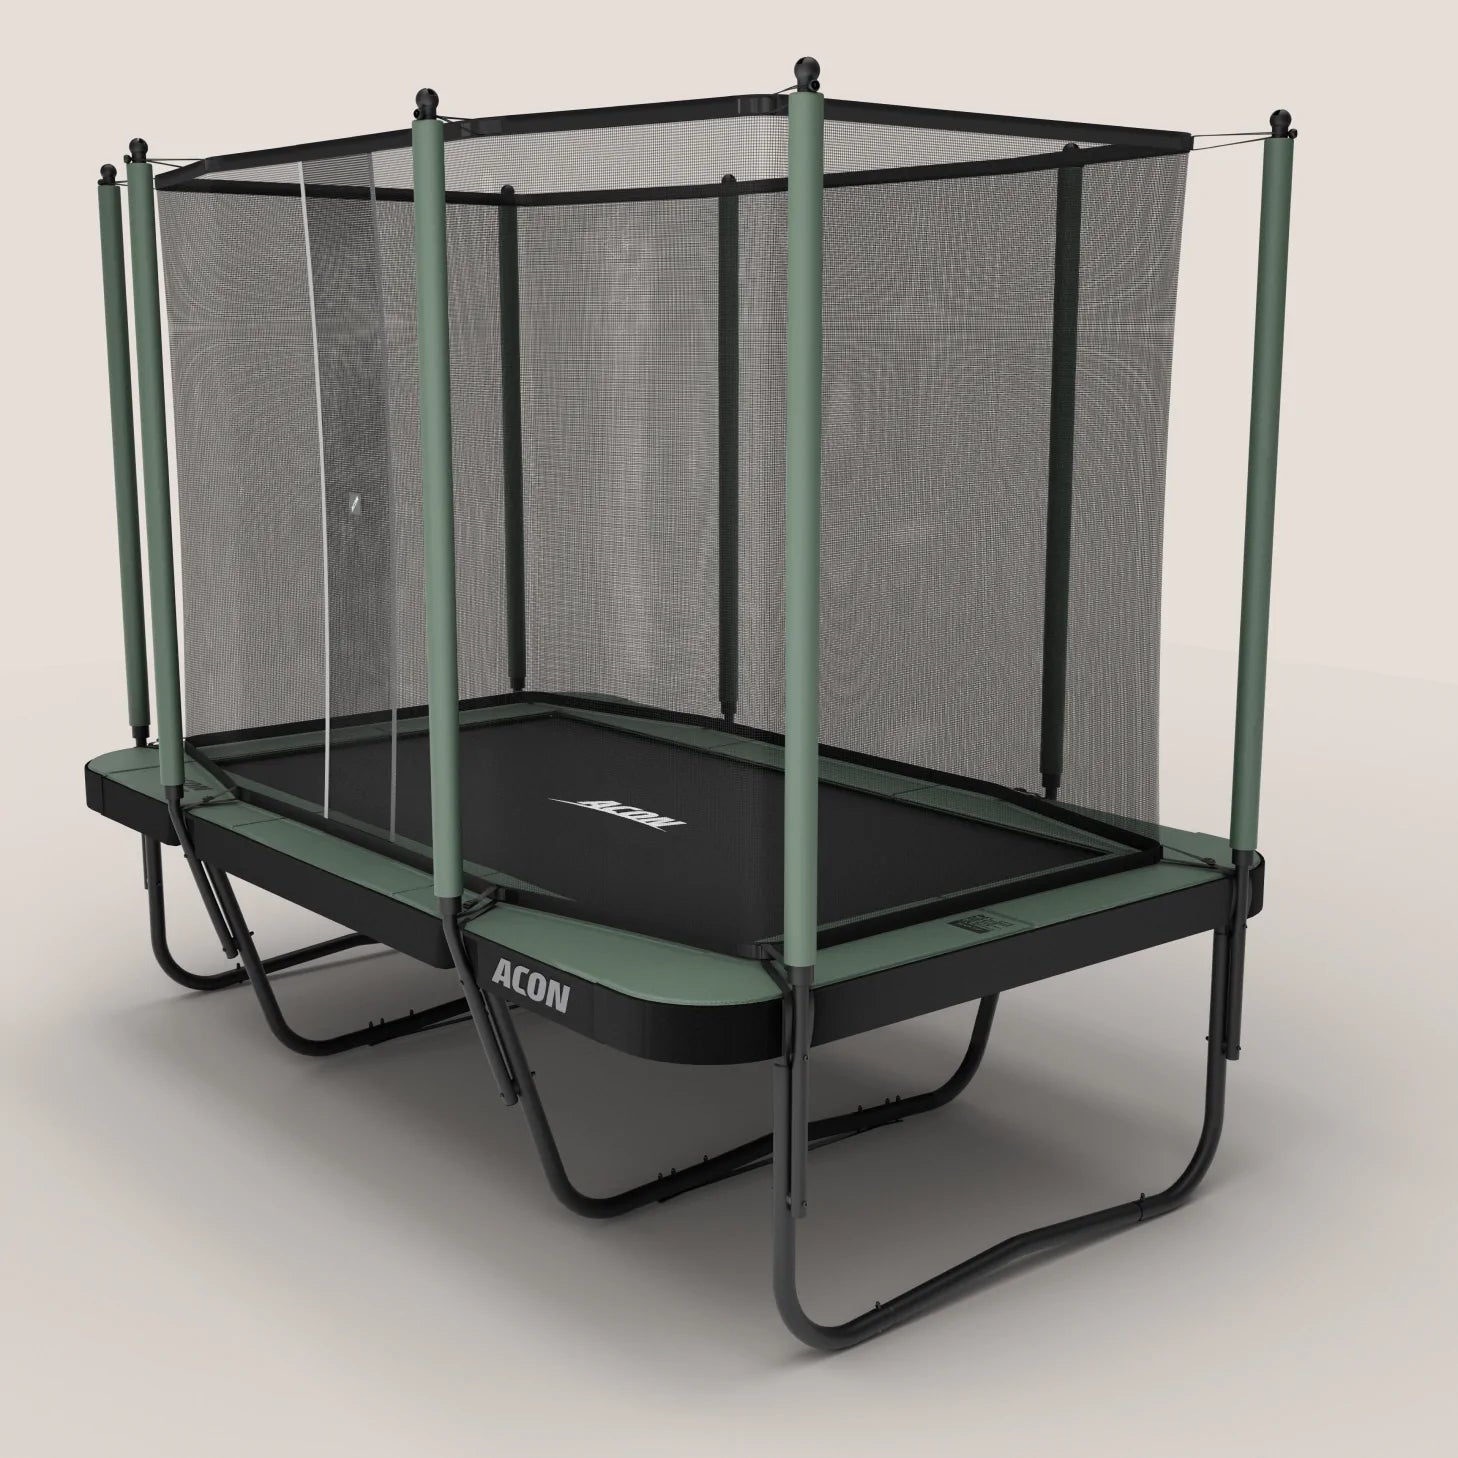 Acon Air 16 Sport HD trampoline with enclosure on a beige background.